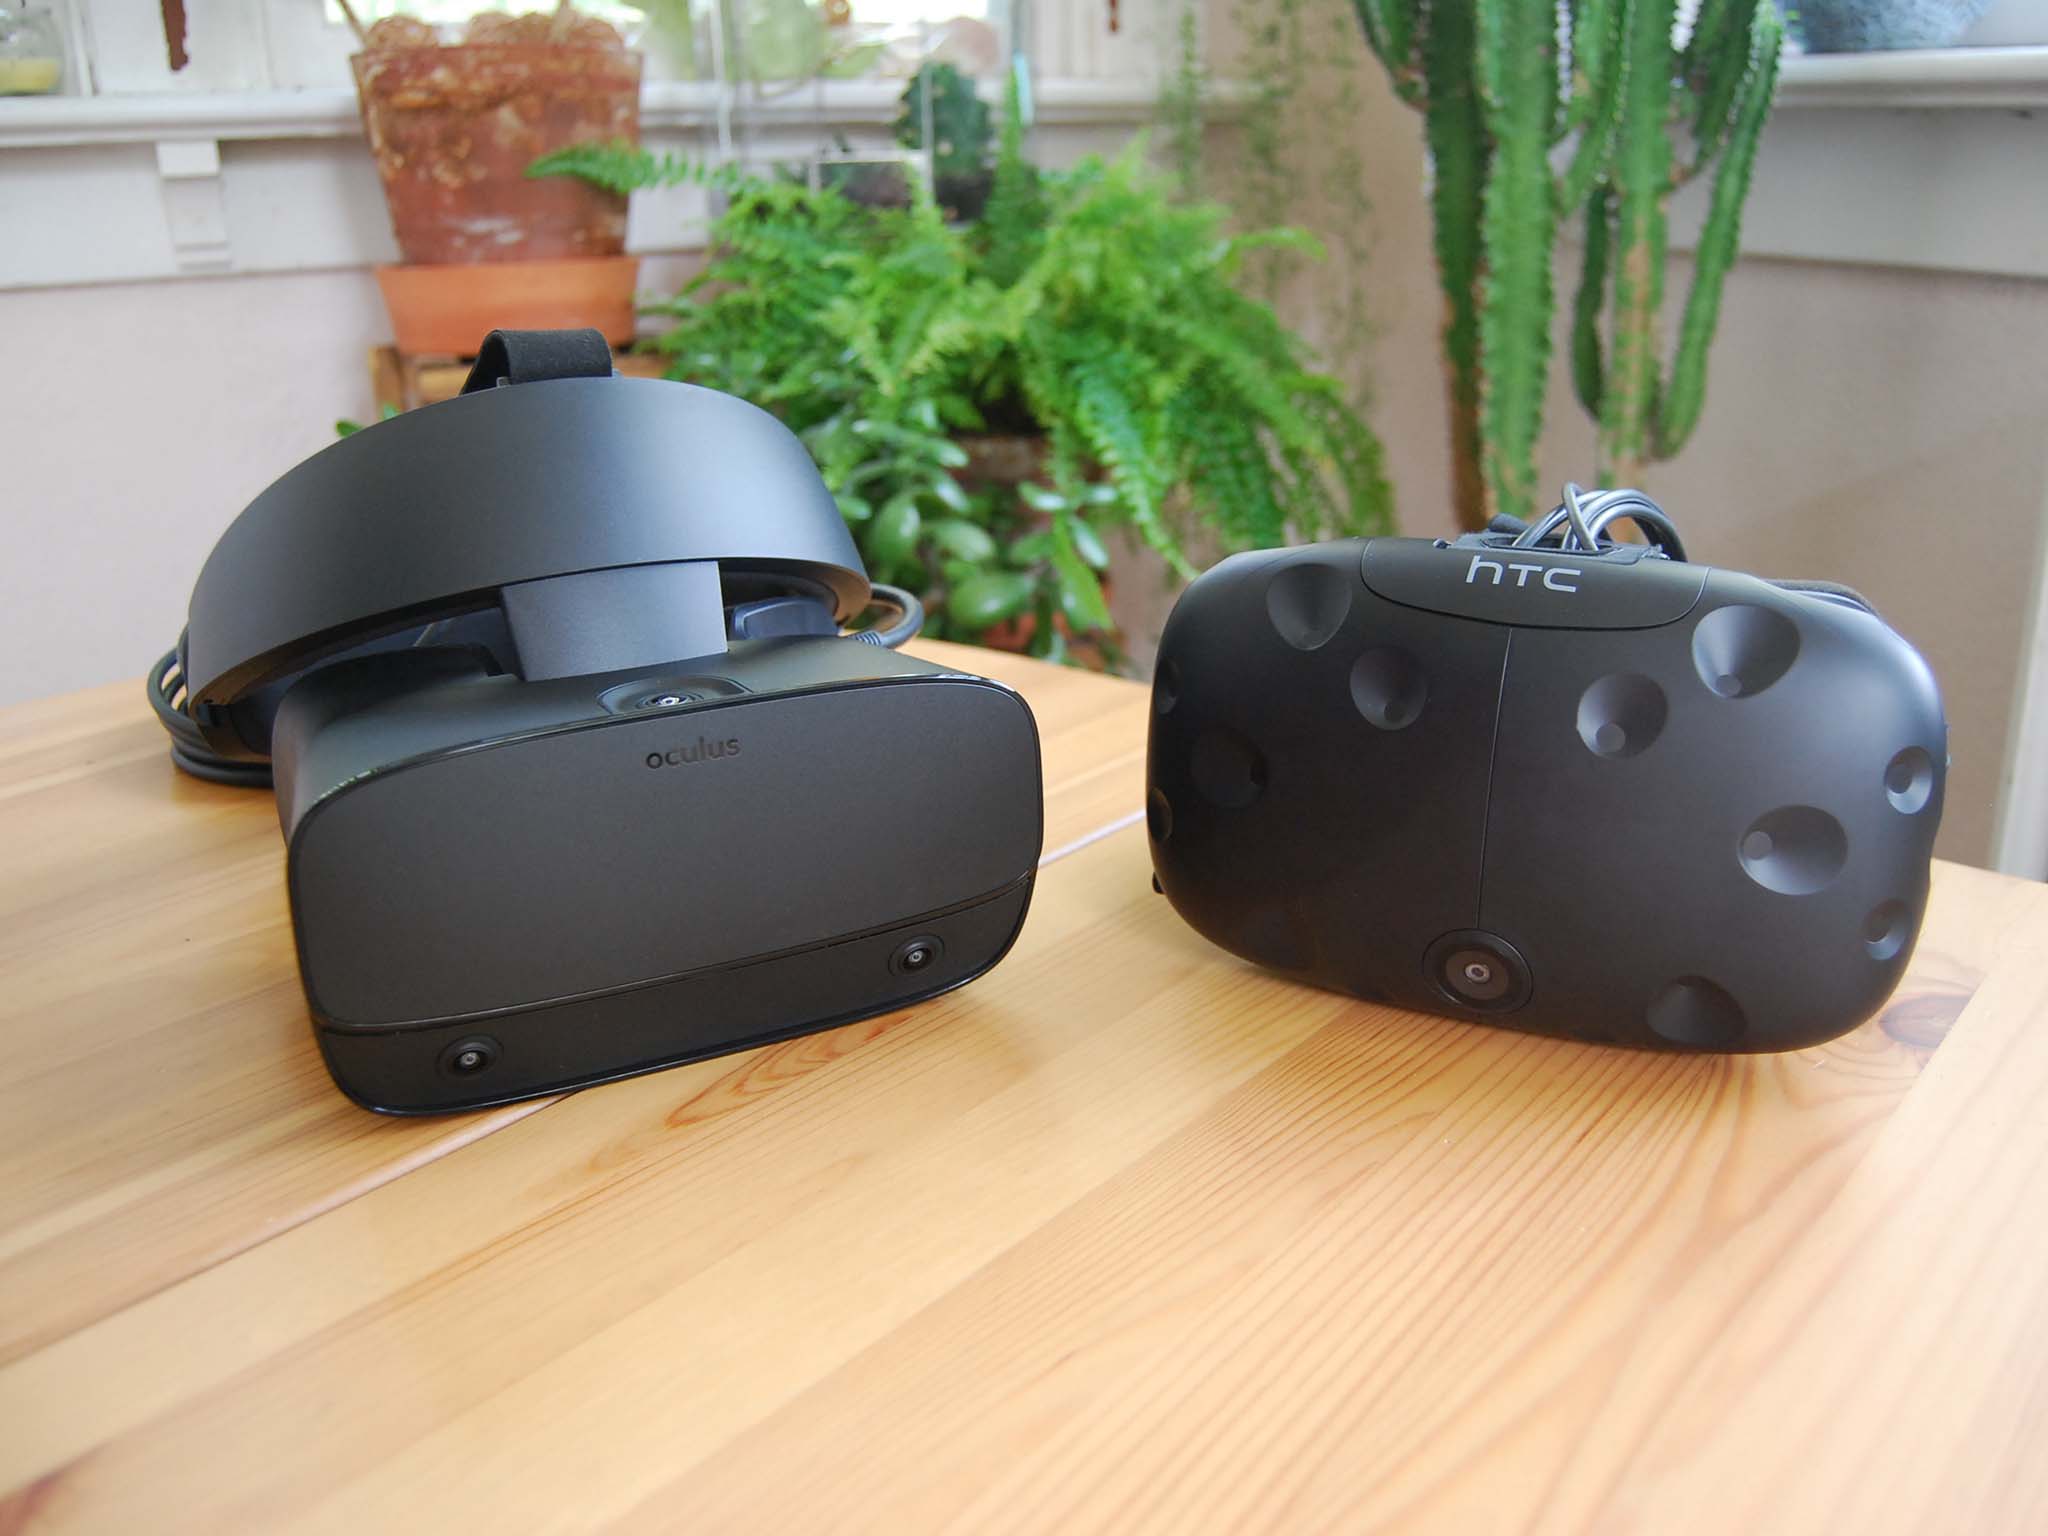 Oculus Rift S and HTC Vive